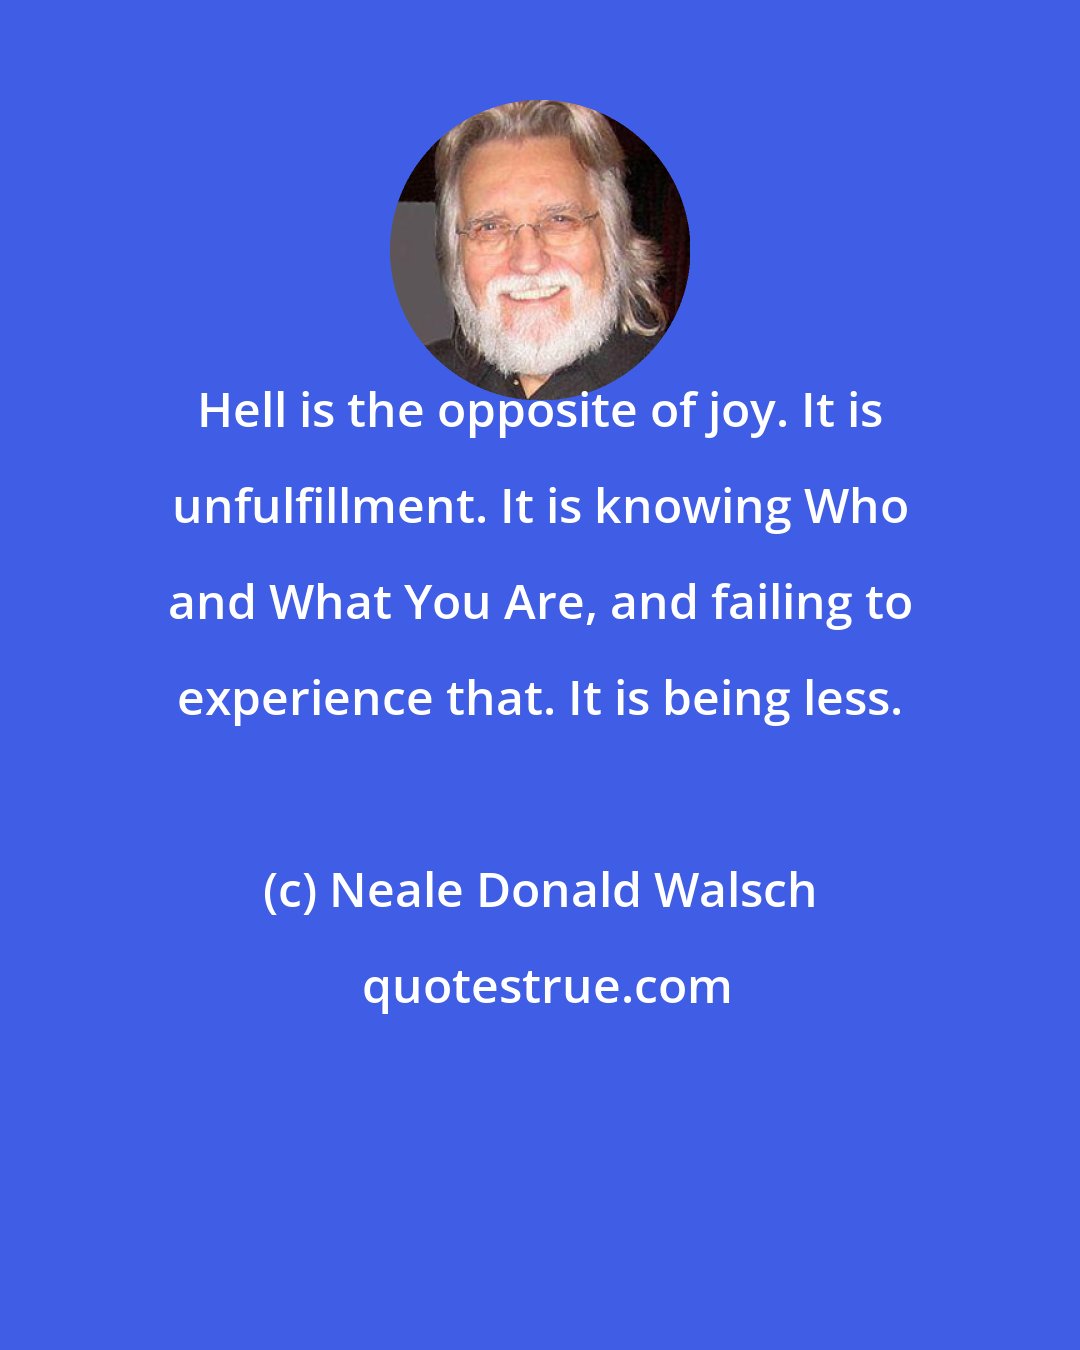 Neale Donald Walsch: Hell is the opposite of joy. It is unfulfillment. It is knowing Who and What You Are, and failing to experience that. It is being less.